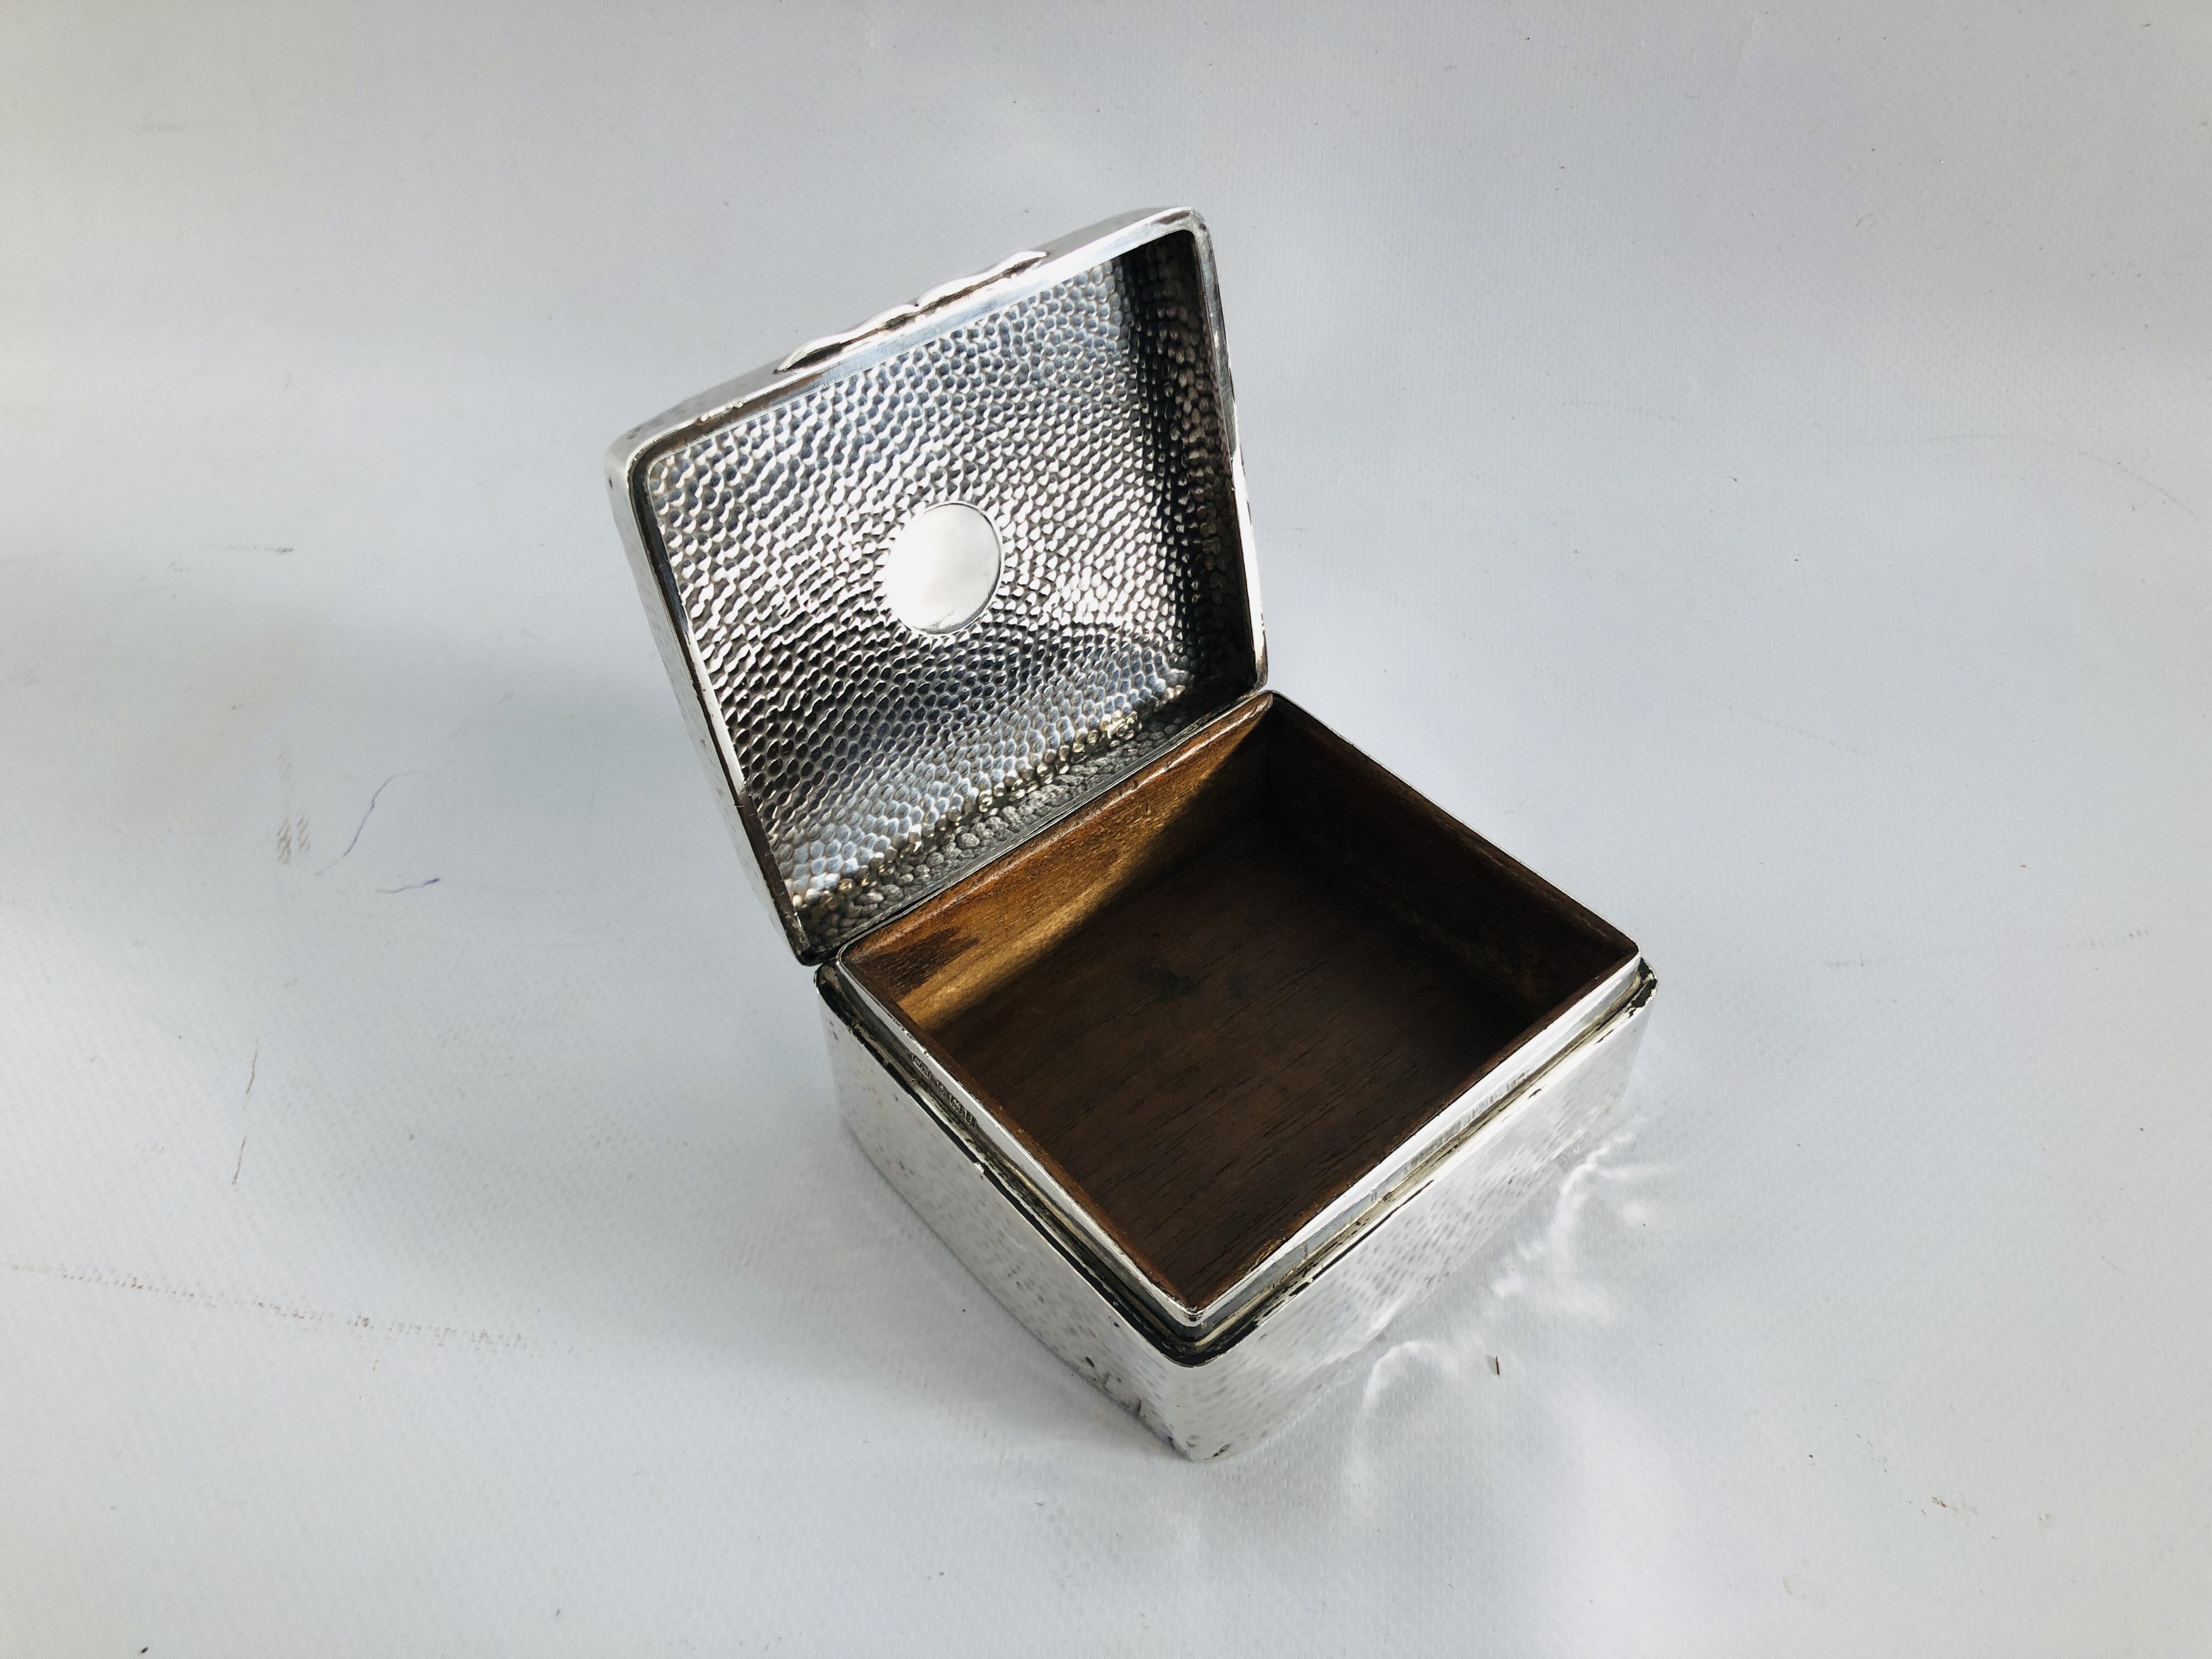 A SMALL SILVER CIGARETTE BOX AND ONE LARGER SILVER CIGARETTE BOX WITH HAMMERED FINISH. - Image 10 of 10